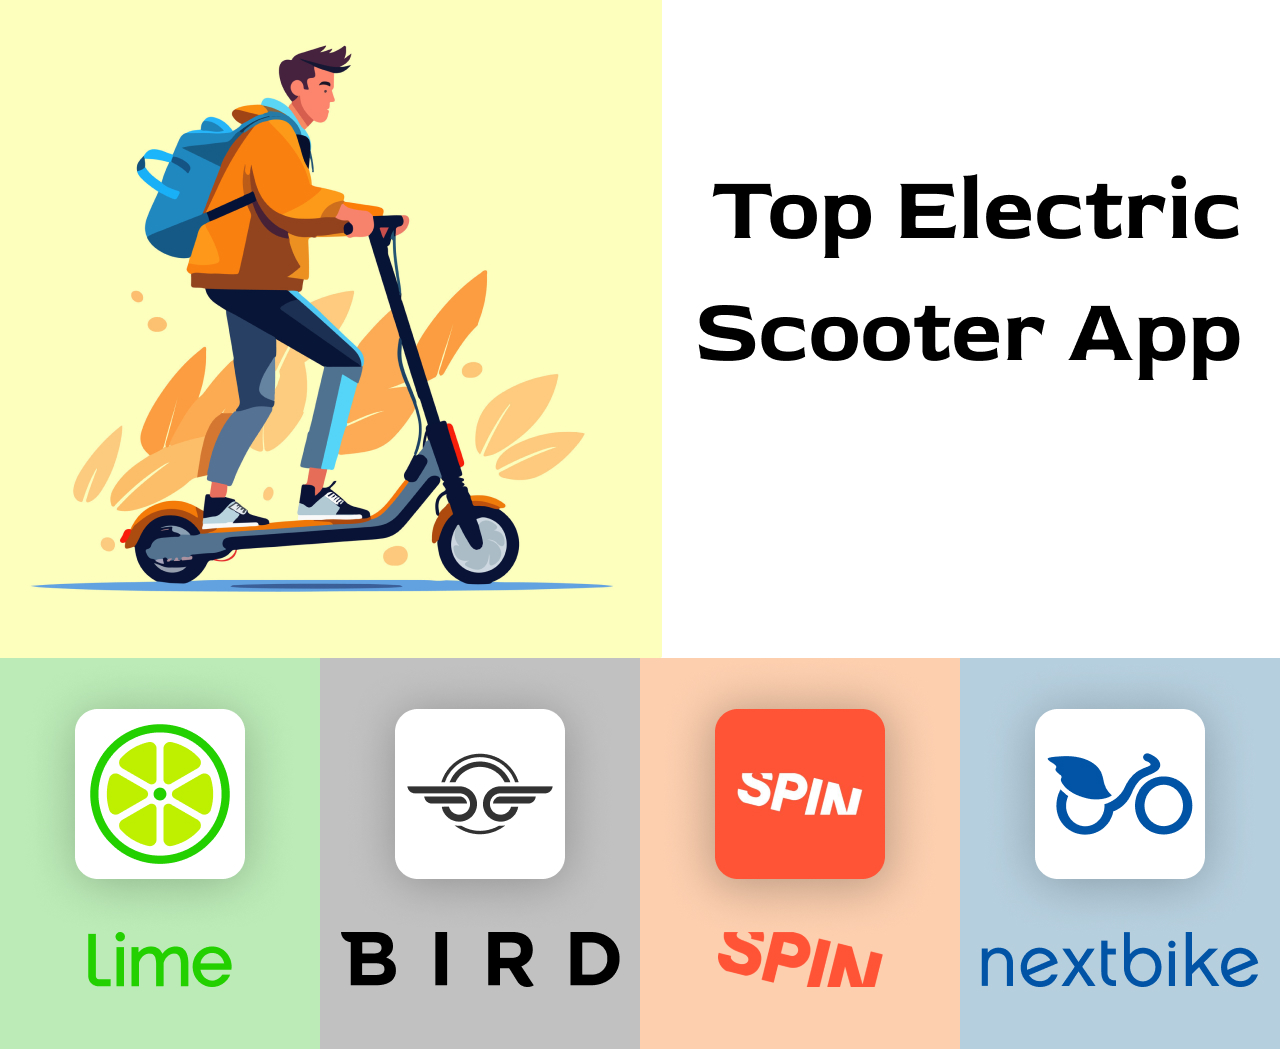 Top Electric Scooter App